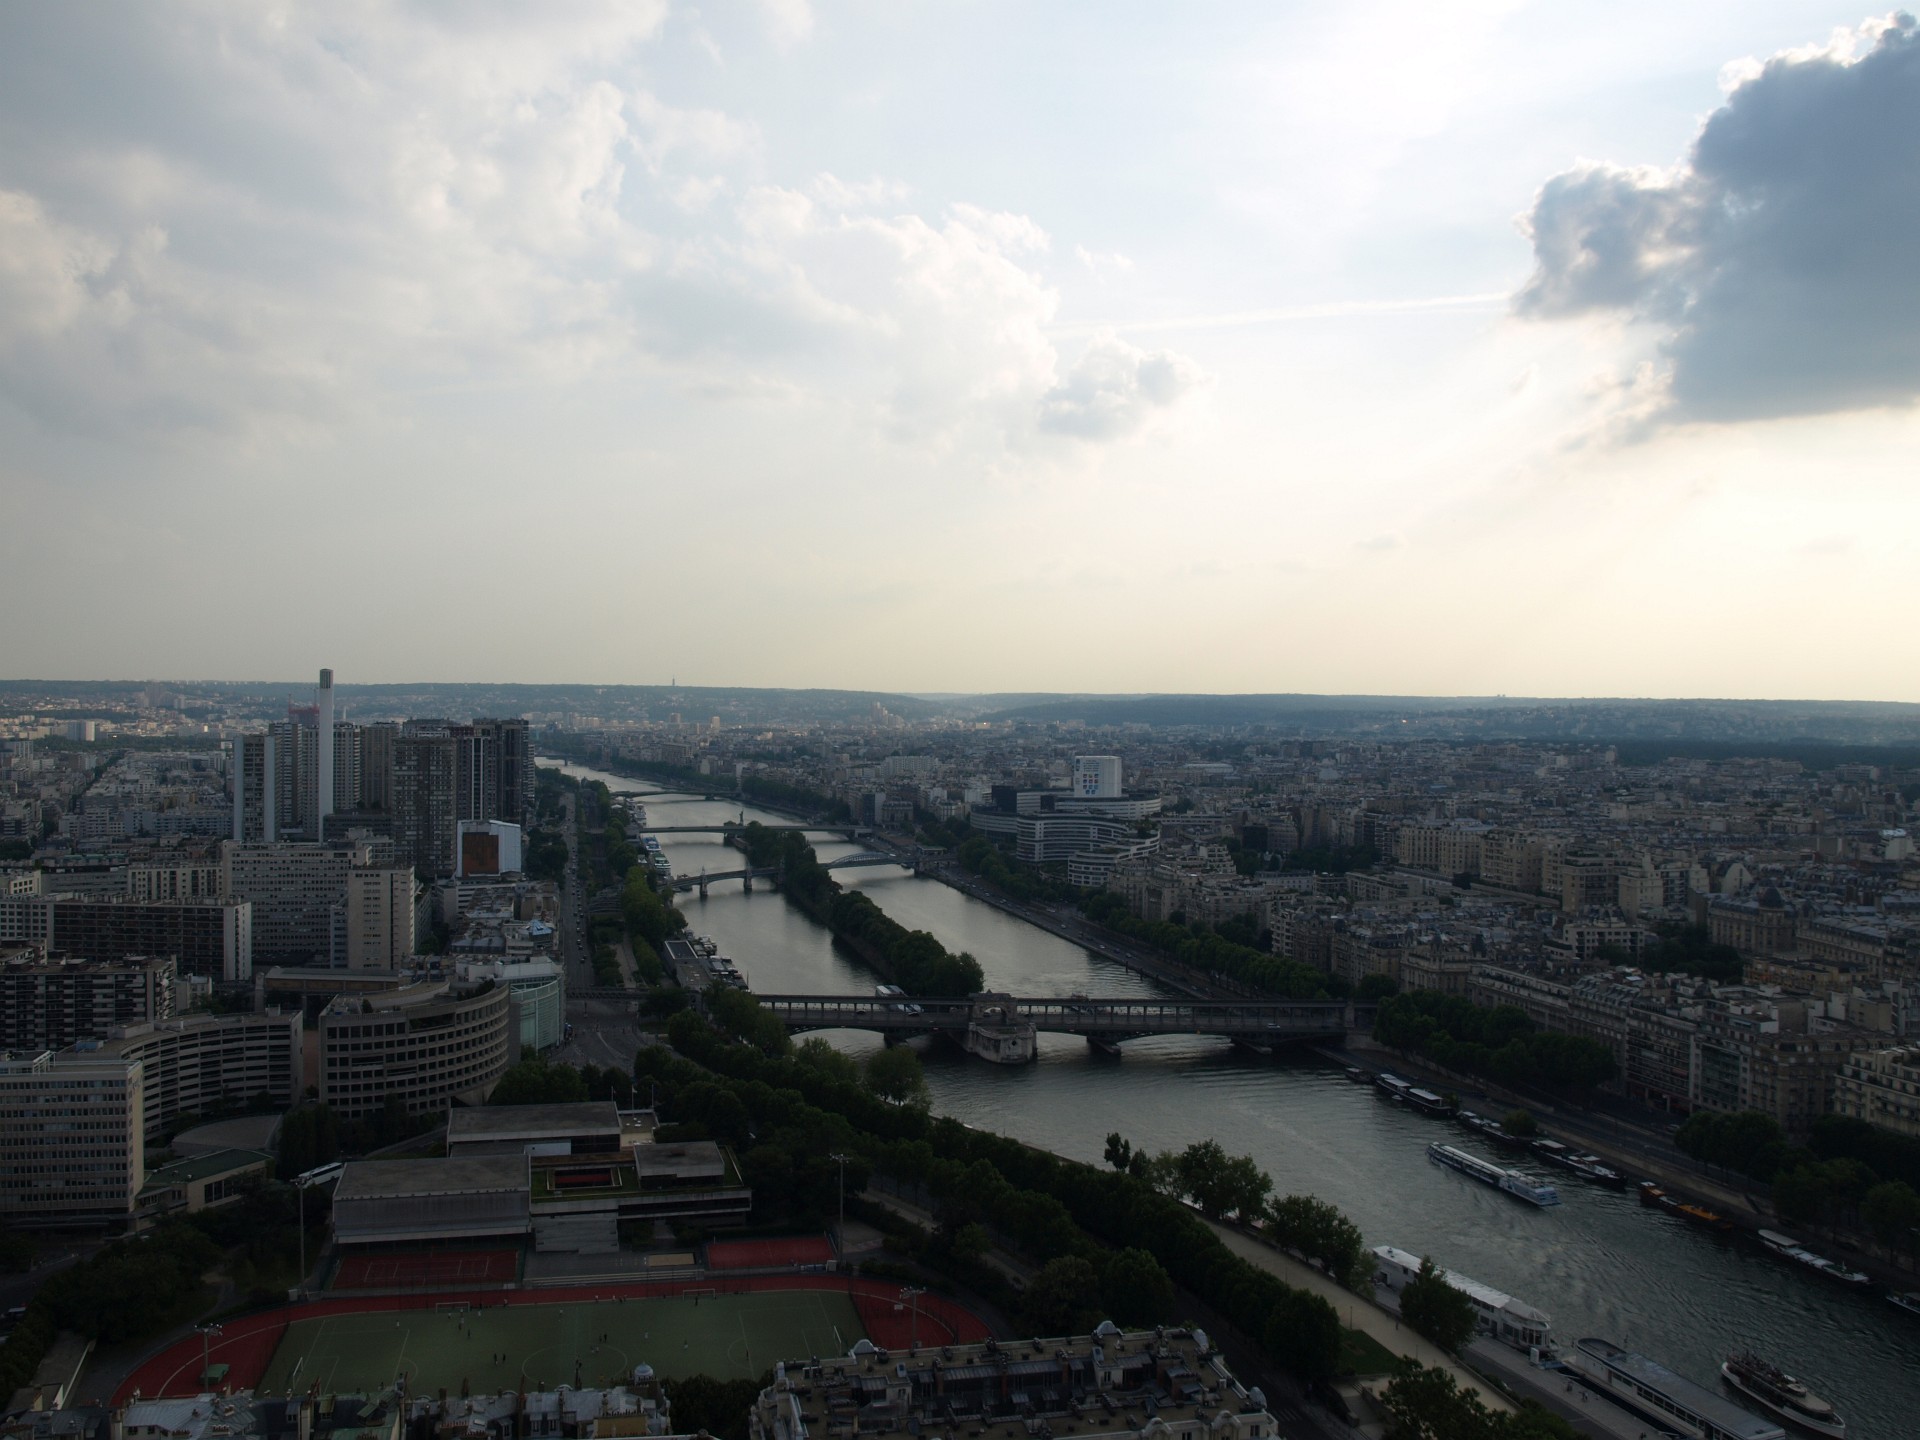 Looking Out Over the Soccer Field and Pont De Bir-Hakeim